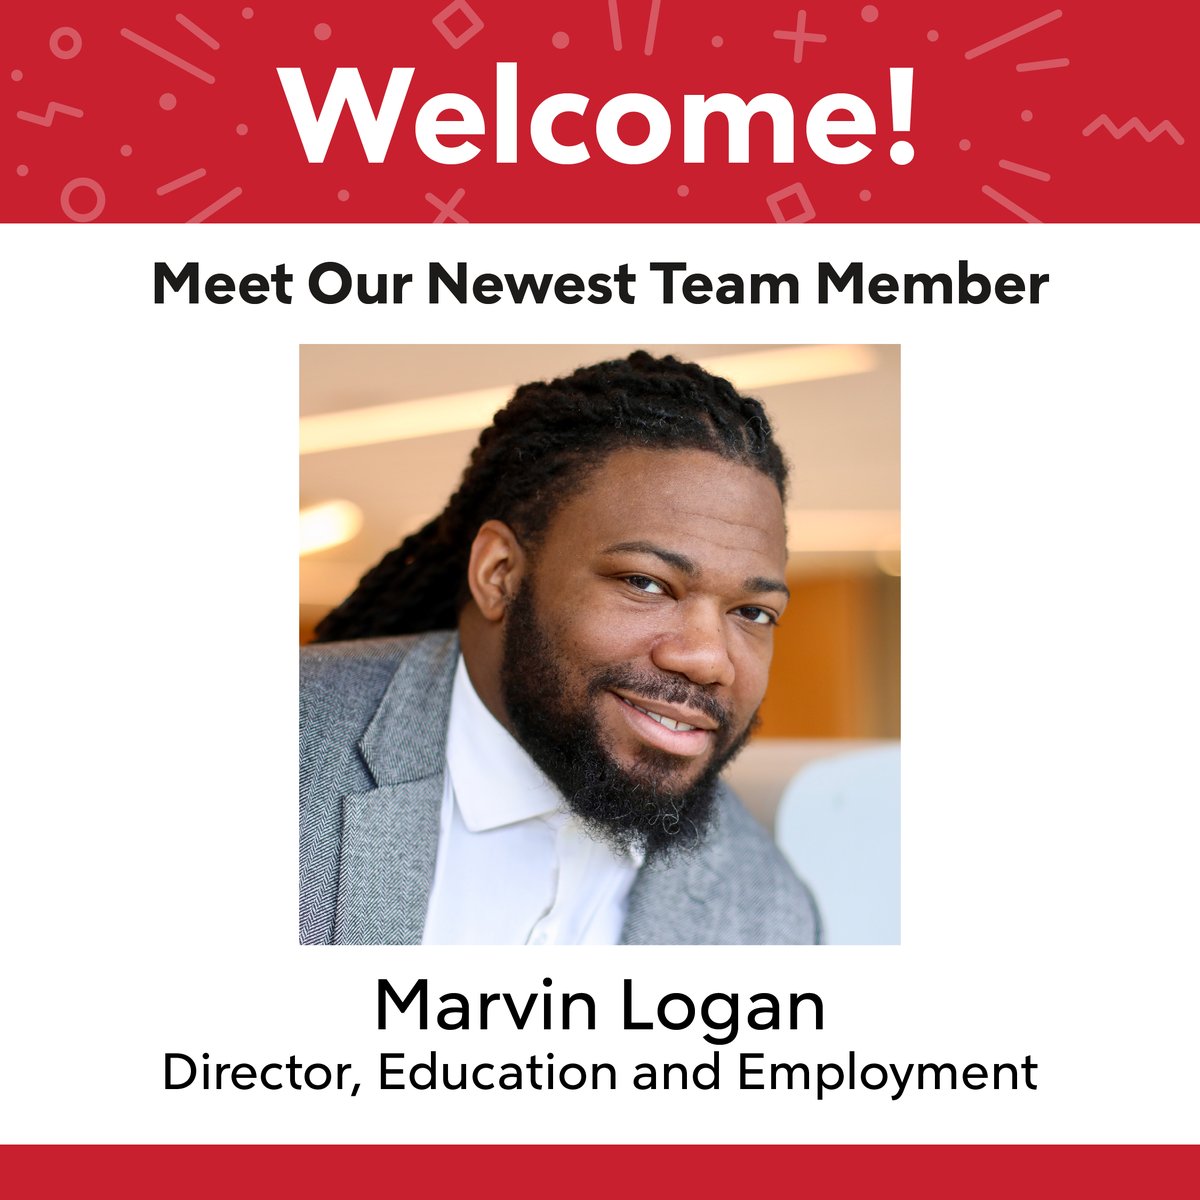 We're excited to share that Marvin Logan has joined the team as our new Director of Education & Employment! Marvin comes to us from Ohio, where he recently served as Executive Director at @OHWOWKids. Welcome aboard, Marvin!